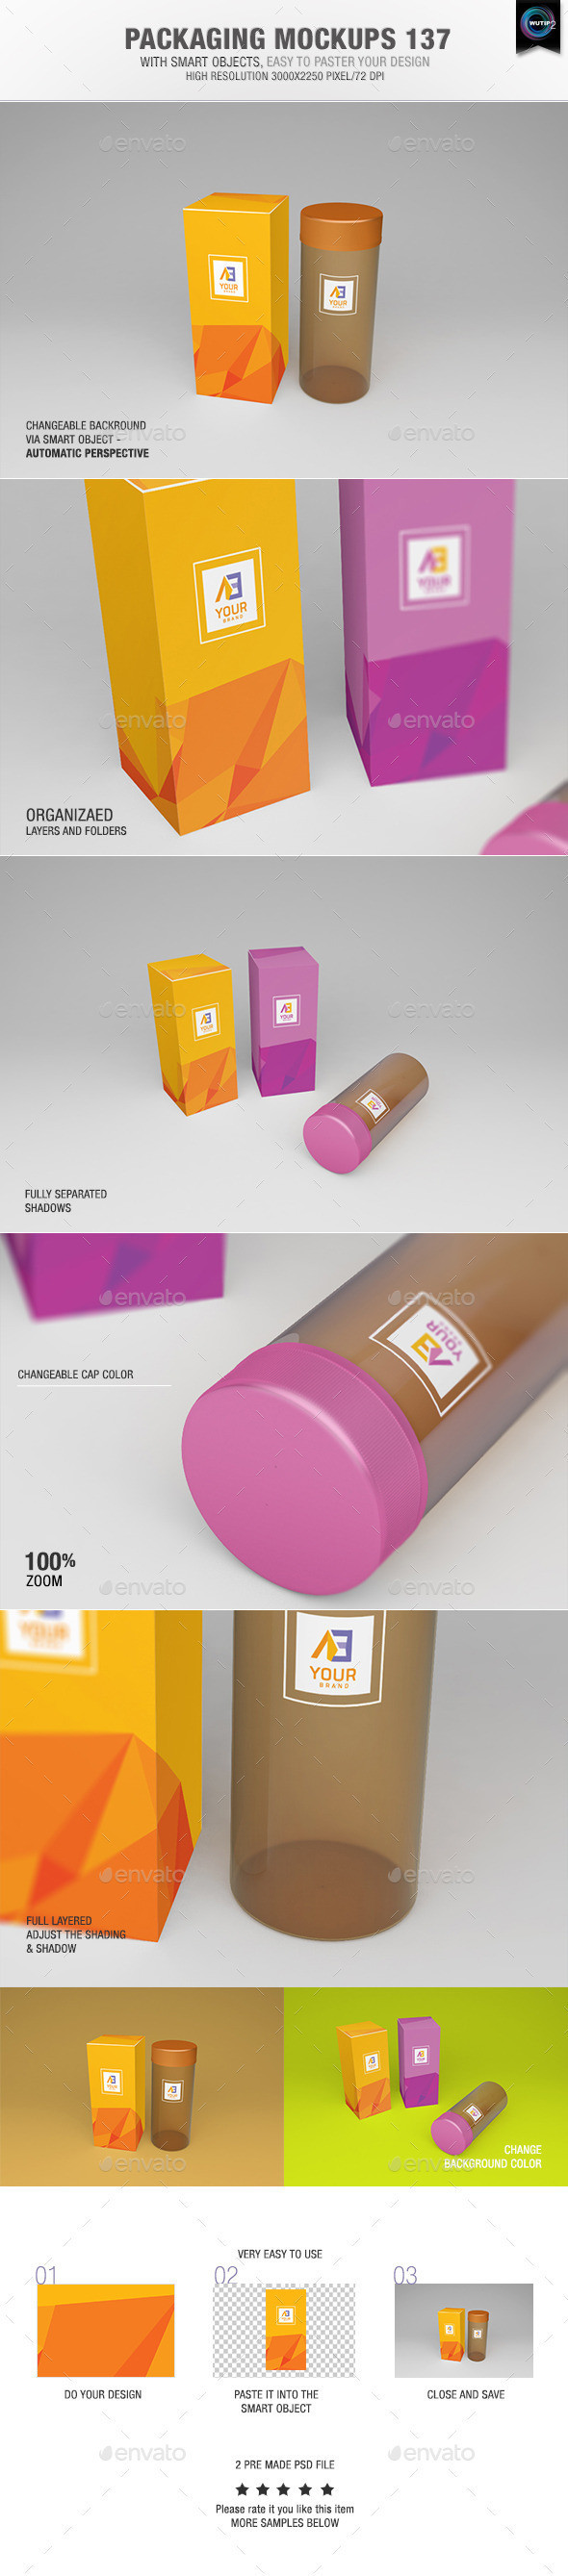 Packaging 20mockups 20137 20preview